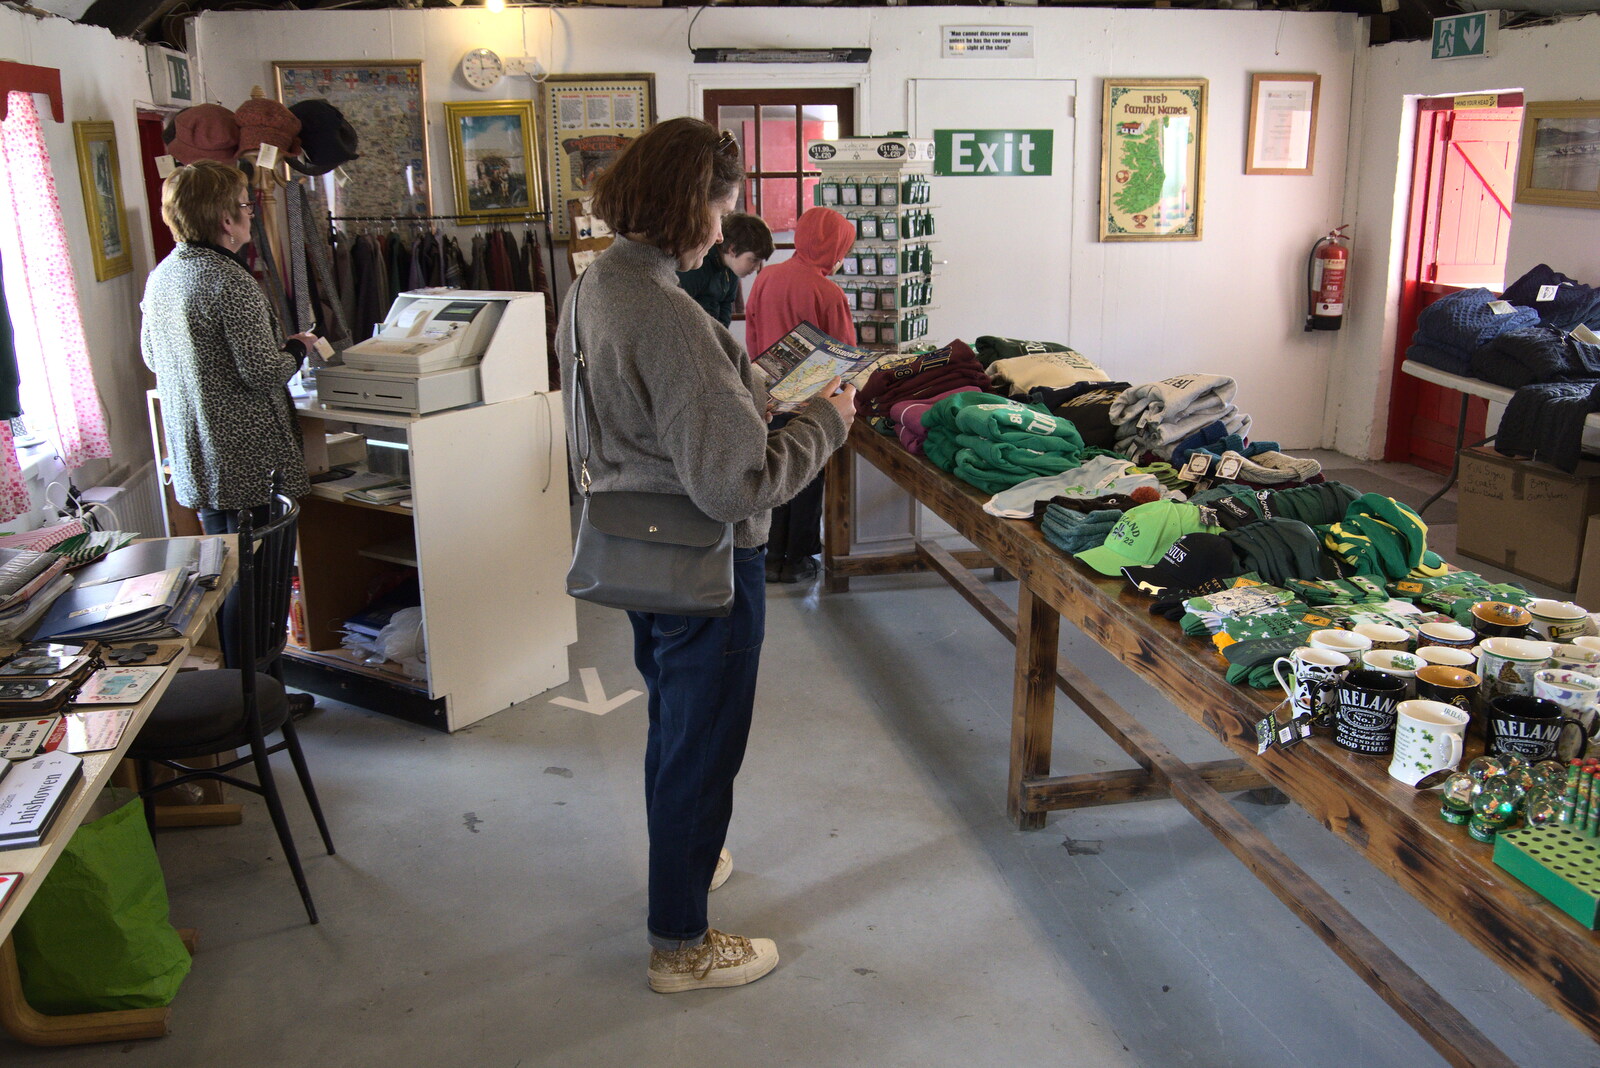 Greencastle, Doagh and Malin Head, County Donegal, Ireland - 19th April 2022: Isobel checks out the gift shop